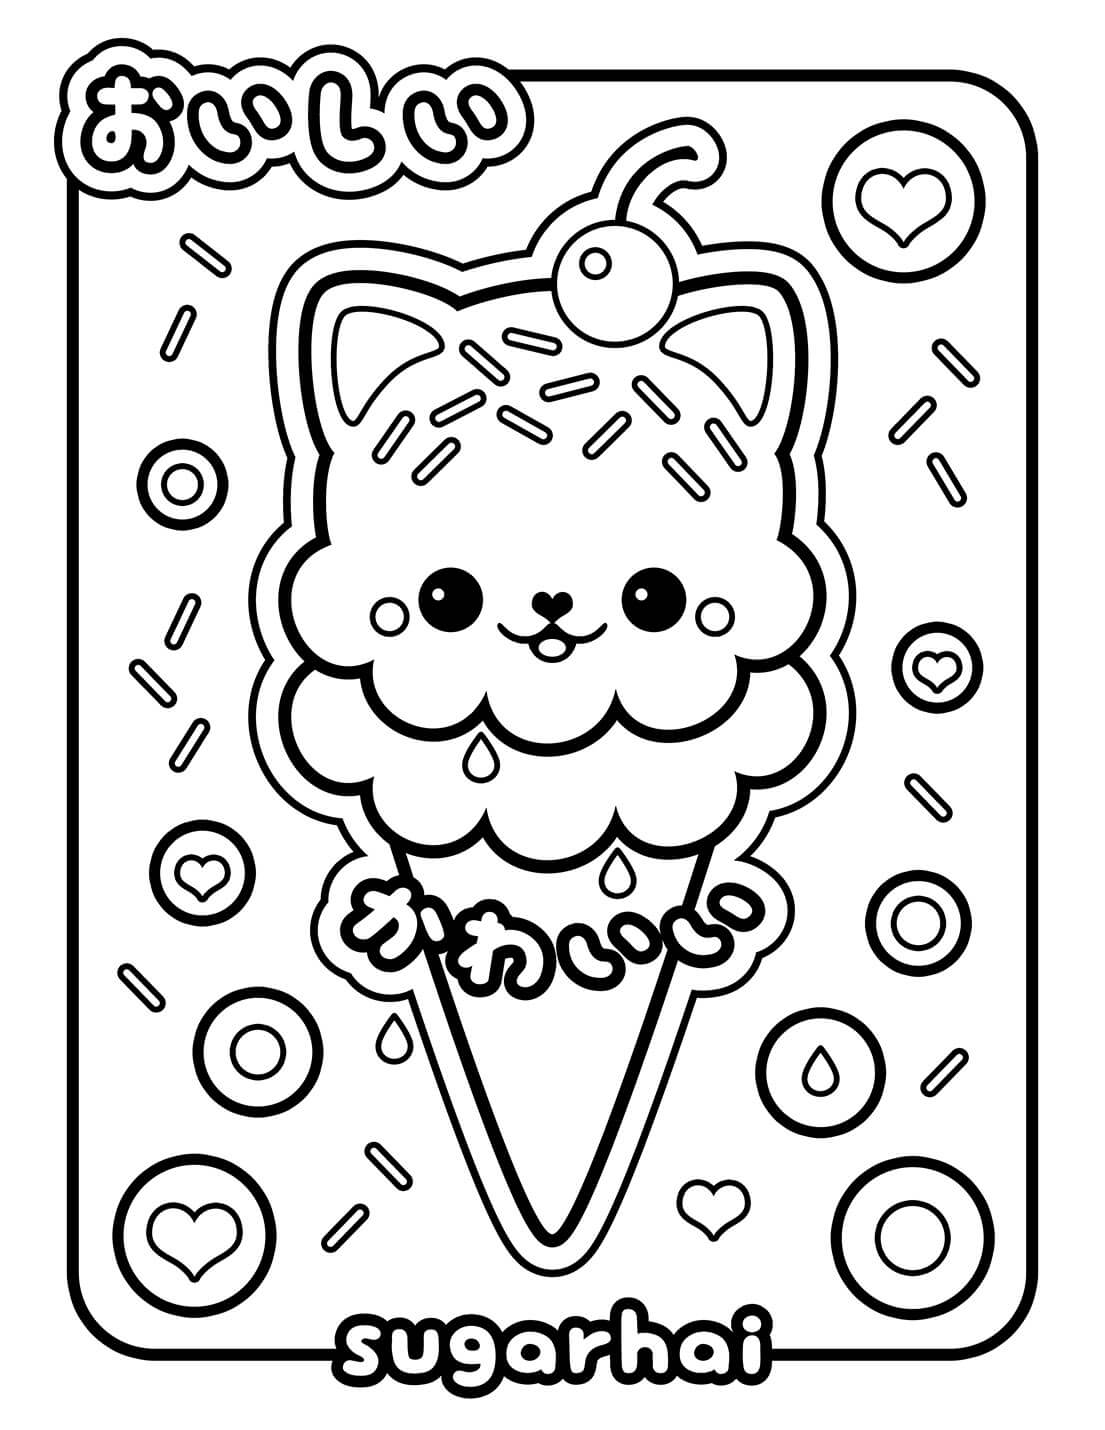 Kawaii Ice Cream Coloring Page   Free Printable Coloring Pages for ...